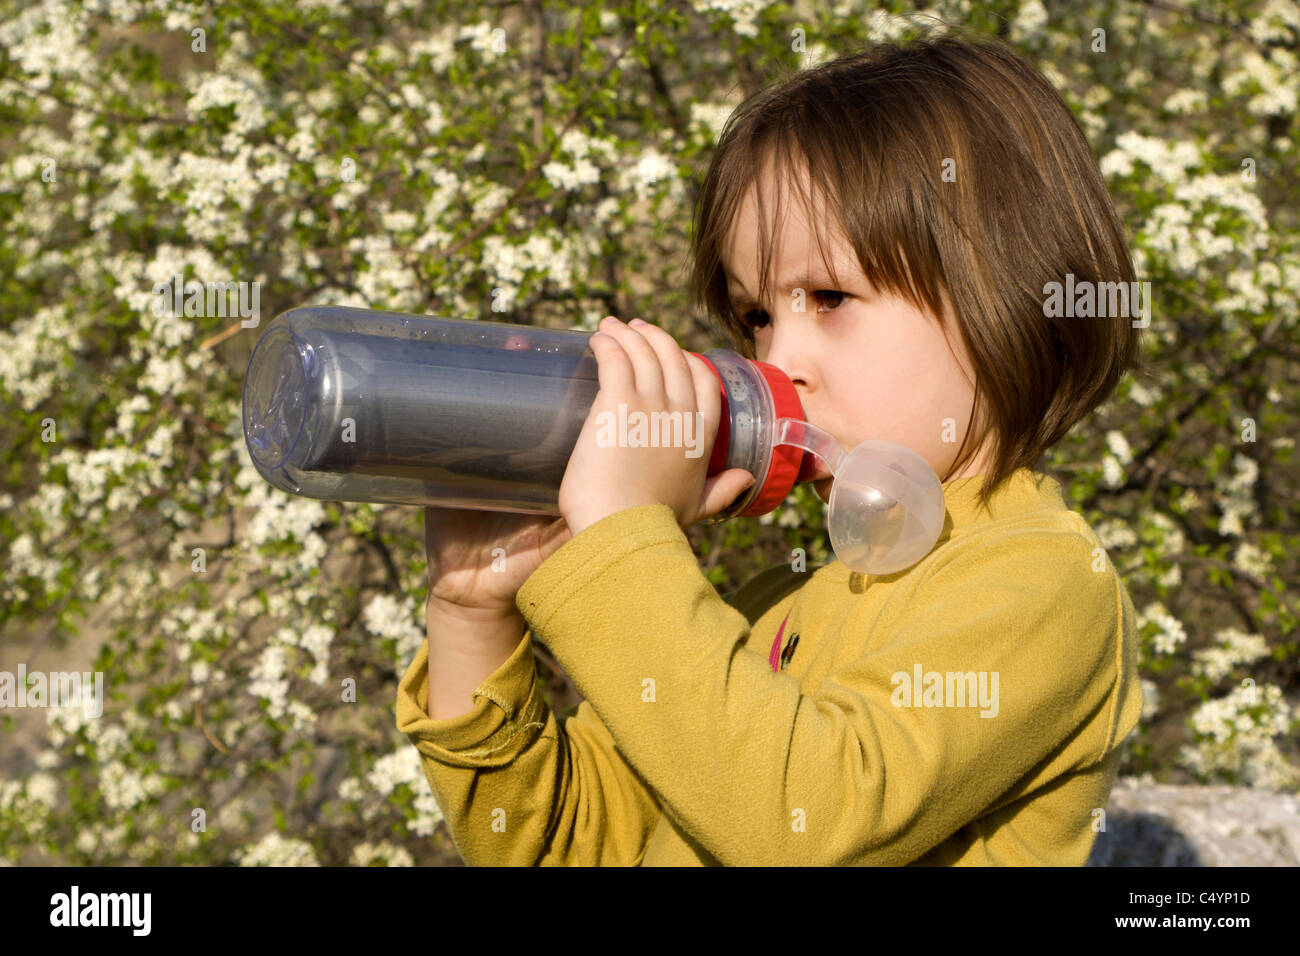 thirst of little girl Stock Photo